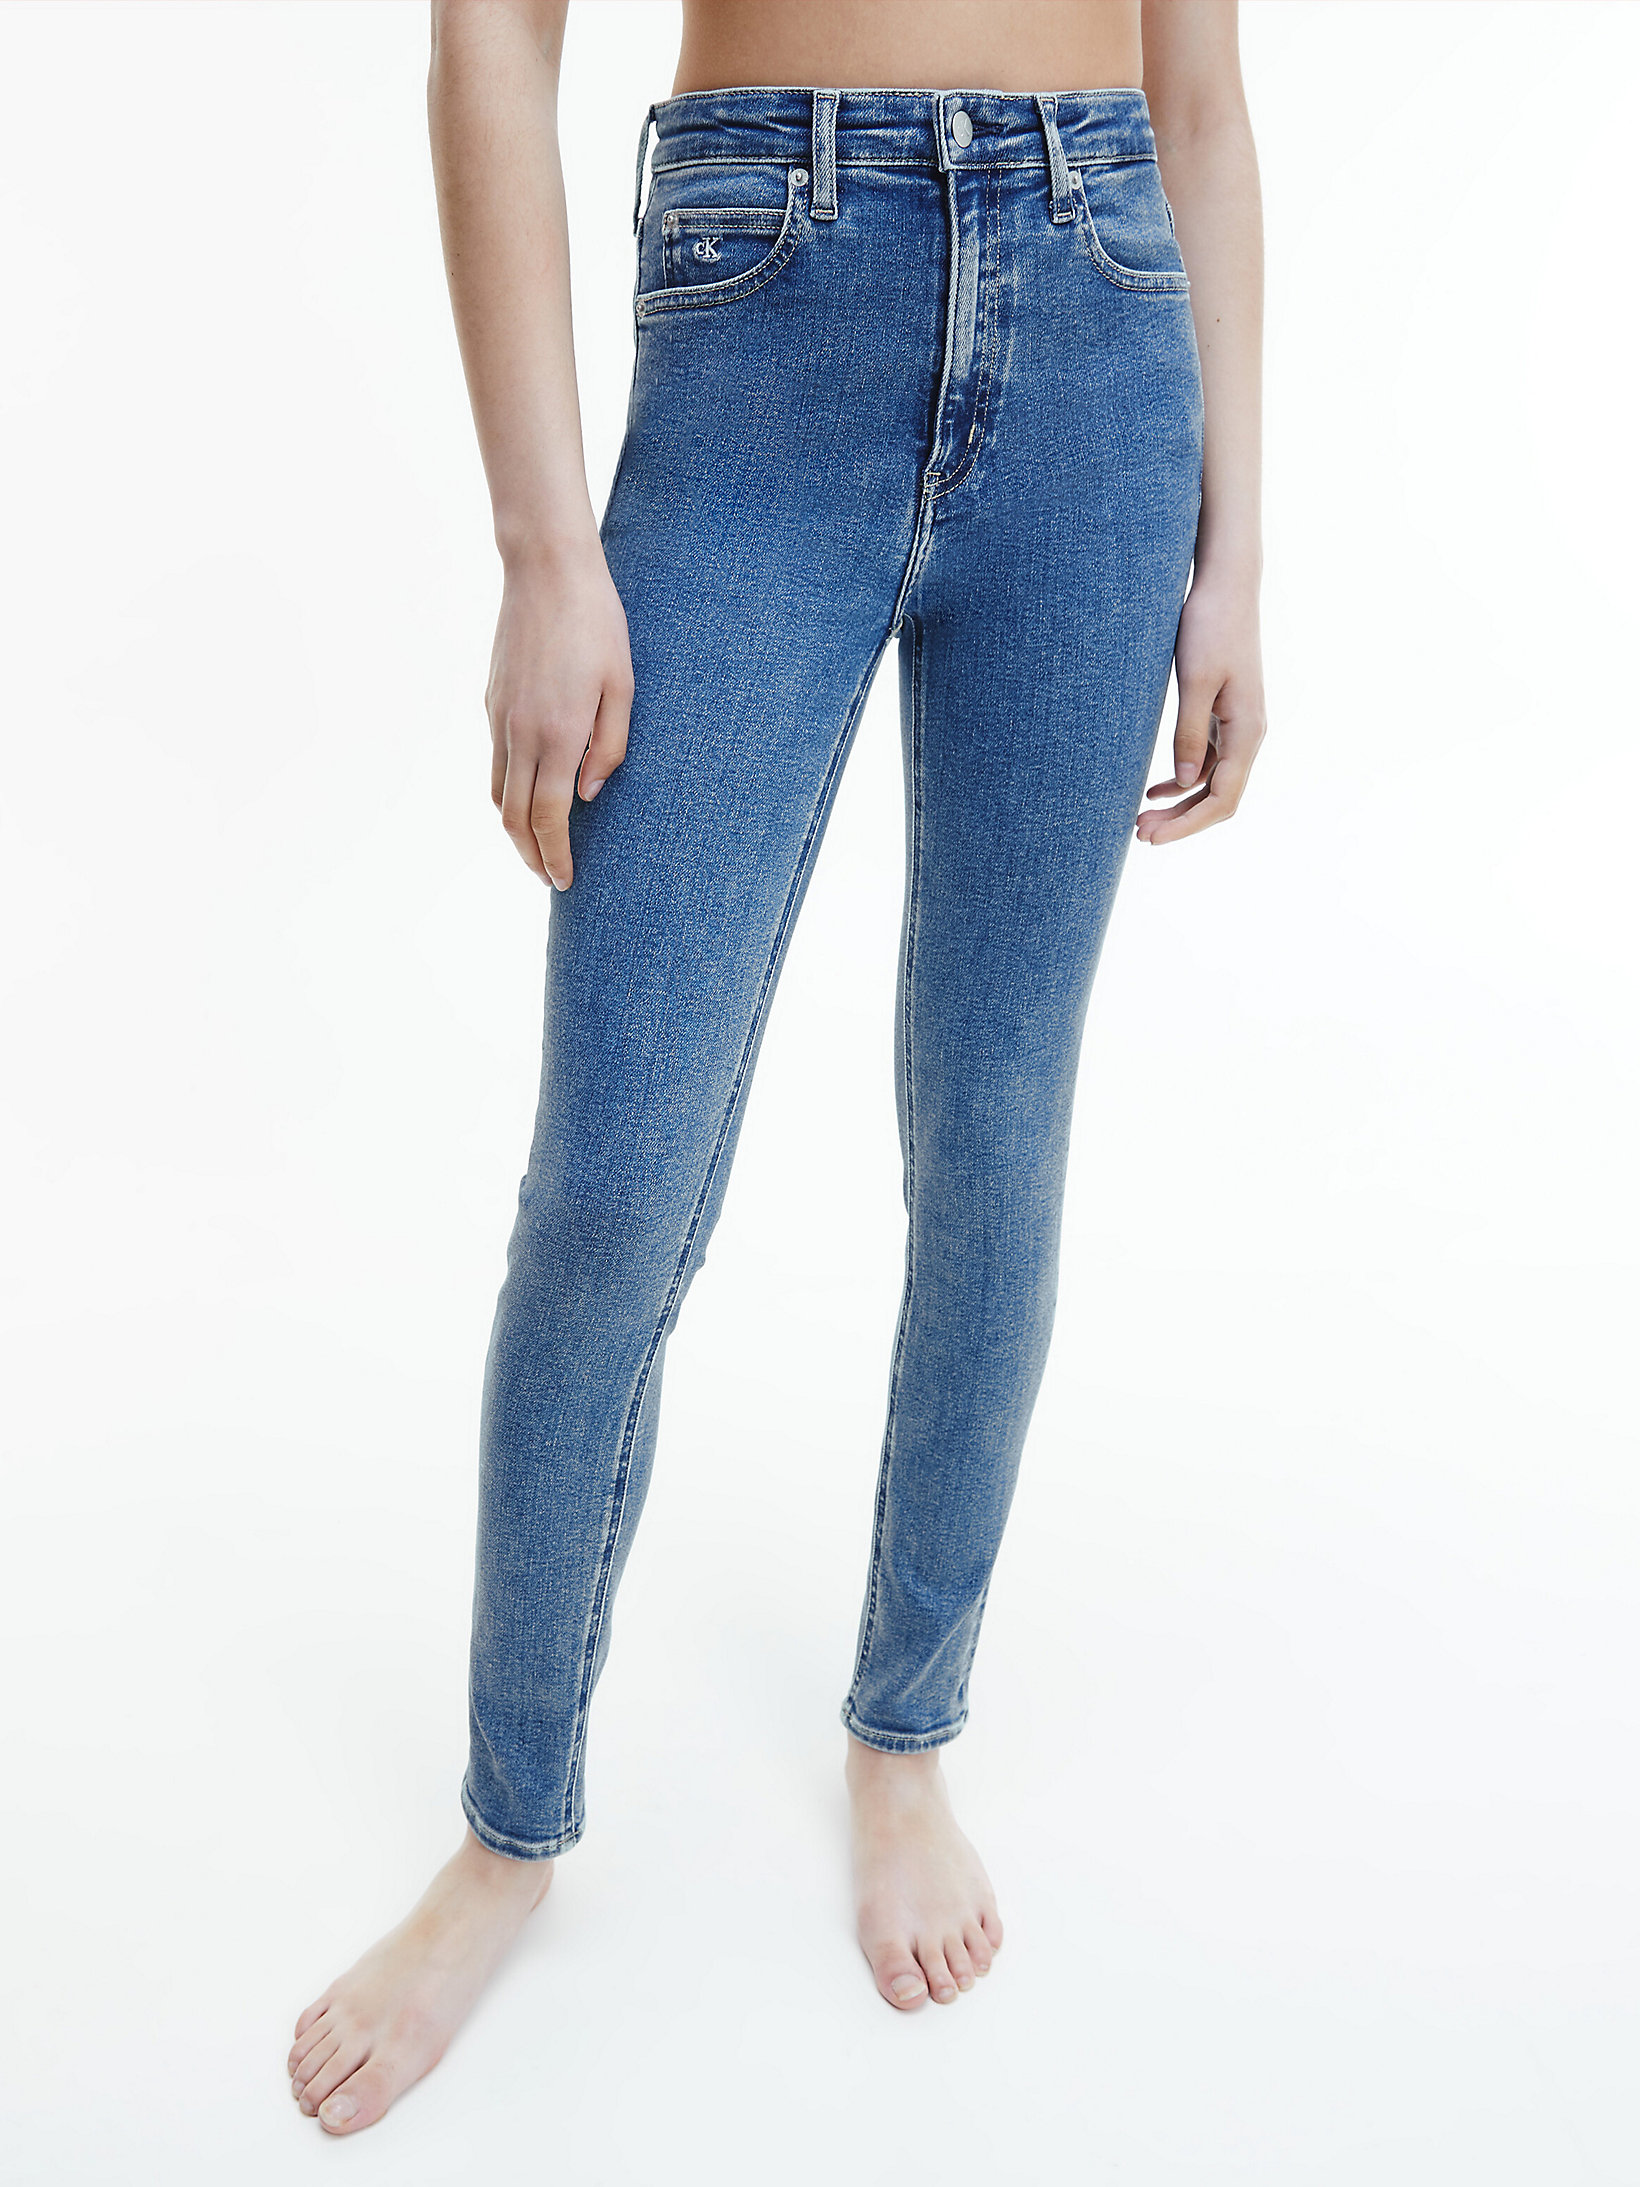 Blue High Rise Skinny Jeans undefined women Calvin Klein